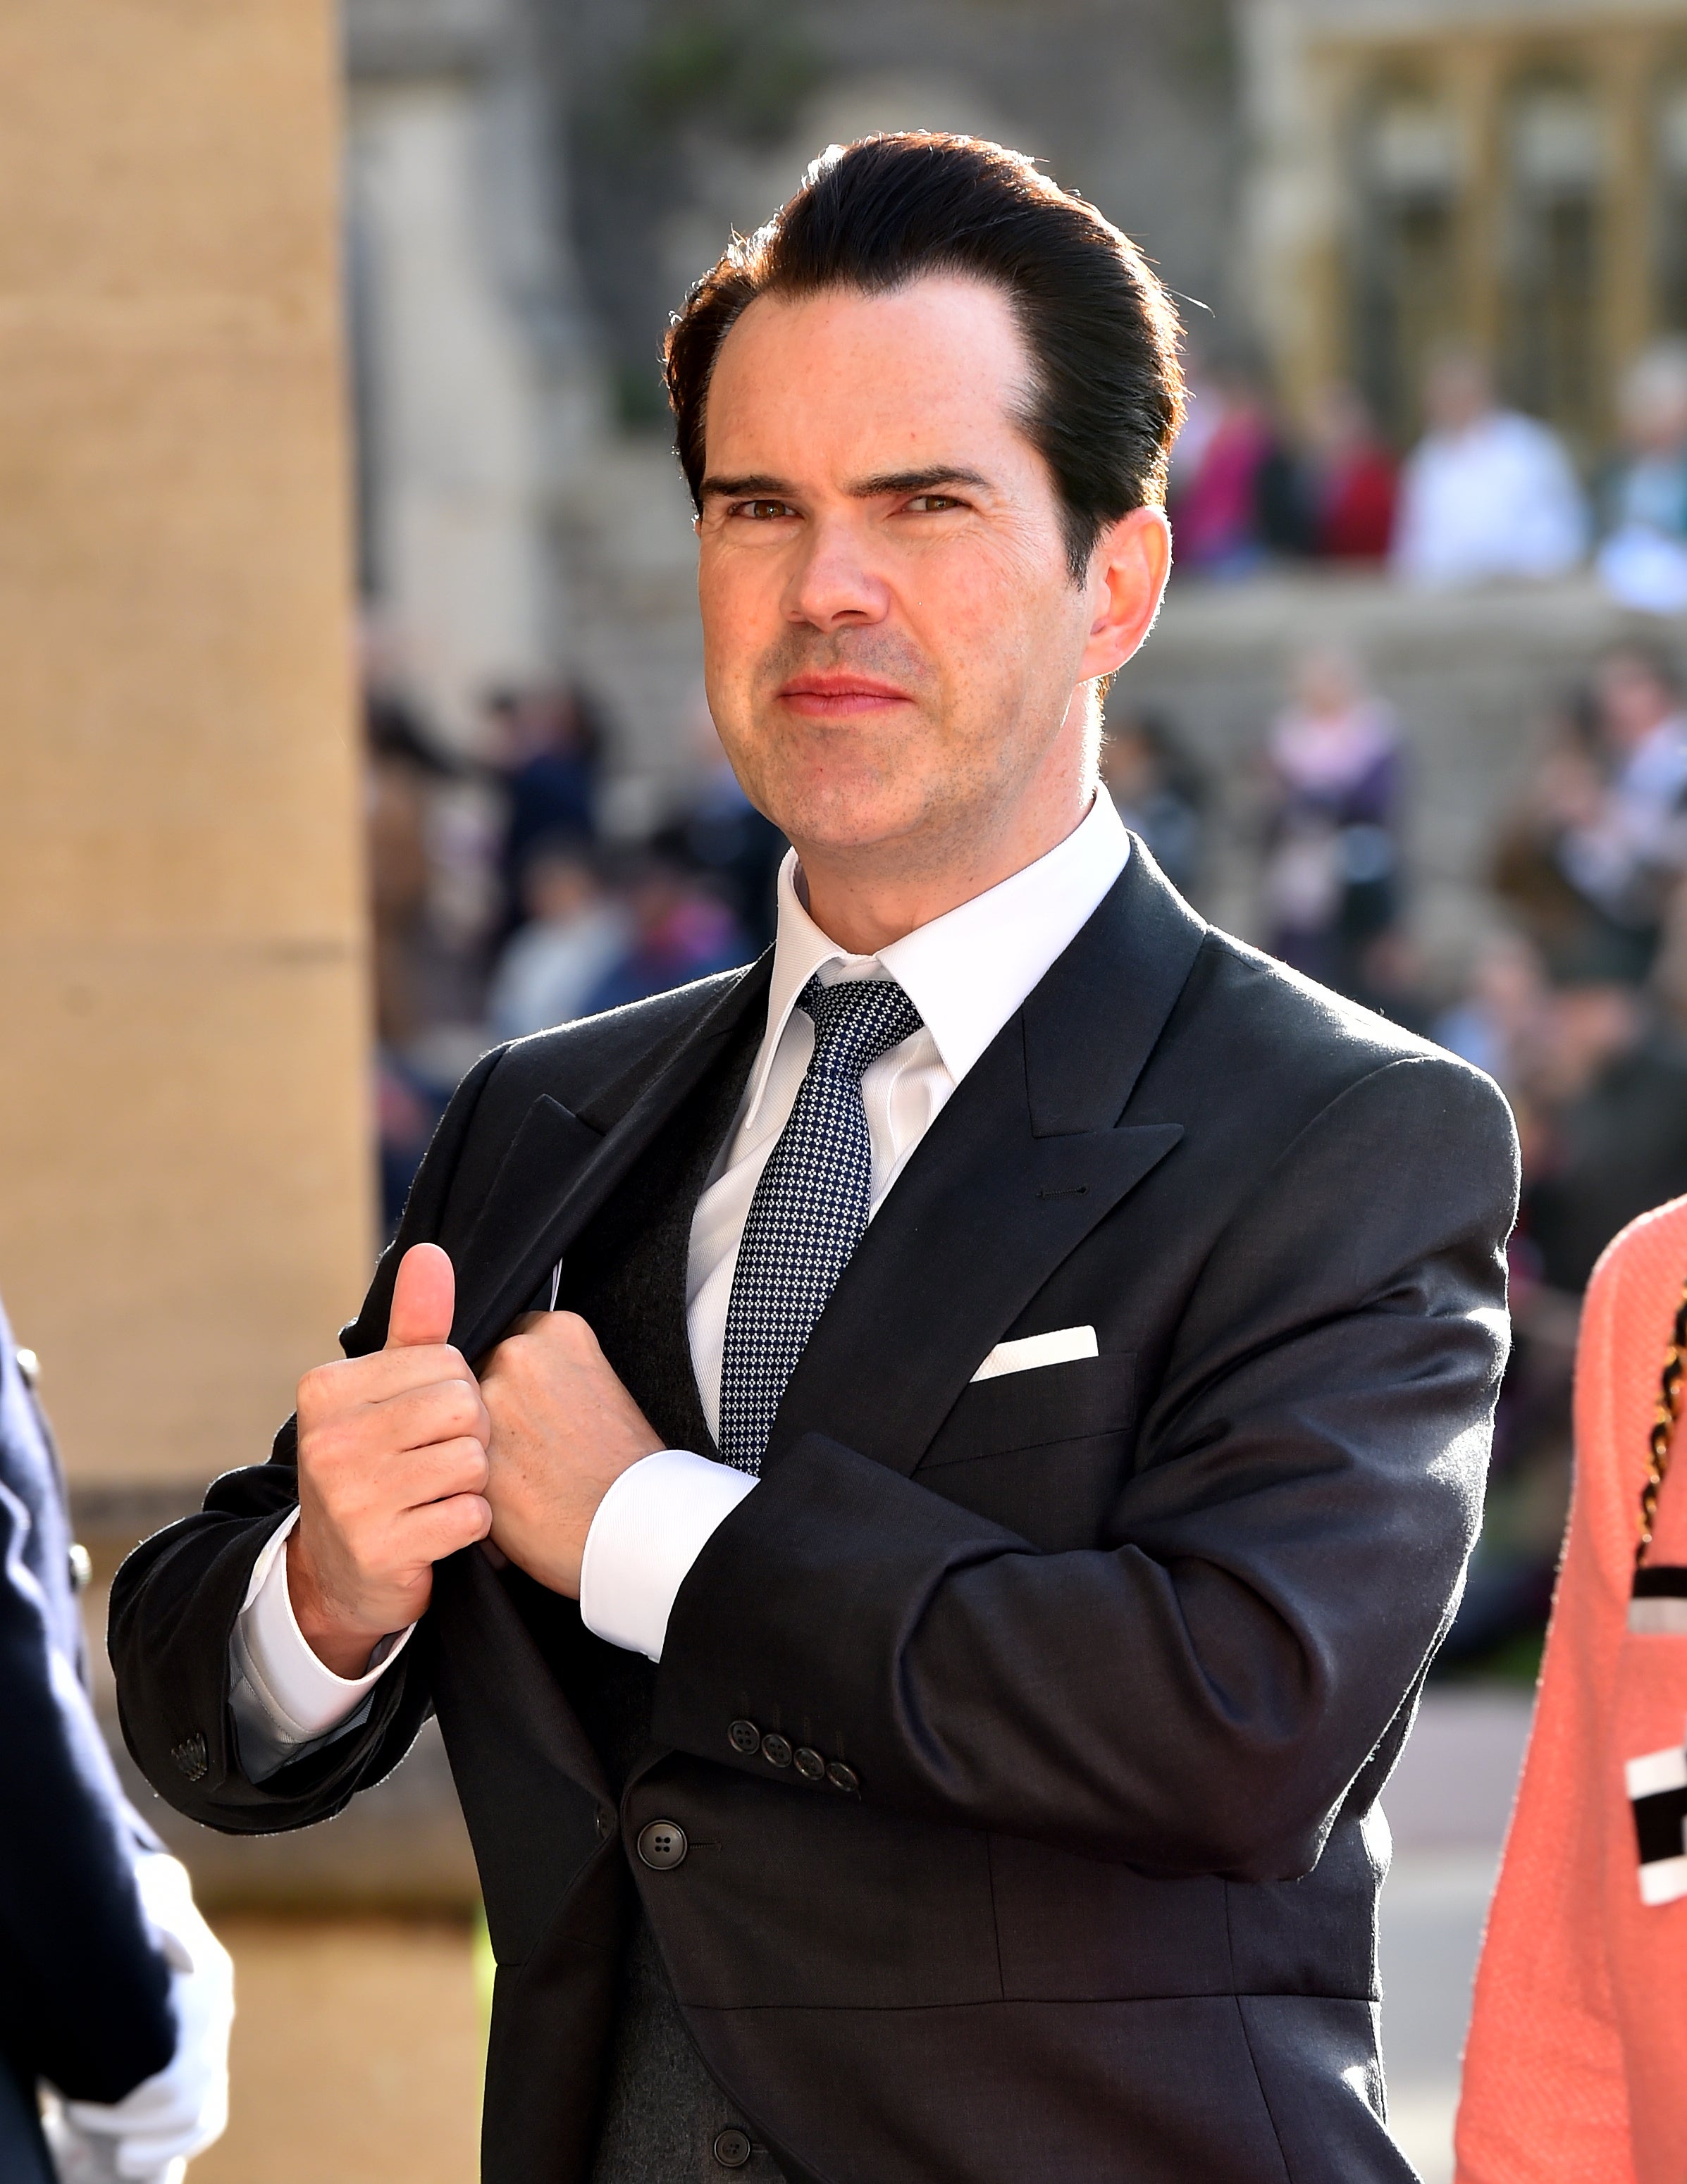 Jimmy Carr receives backlash for joke about travellers in Netflix special (Matt Crossick/PA)